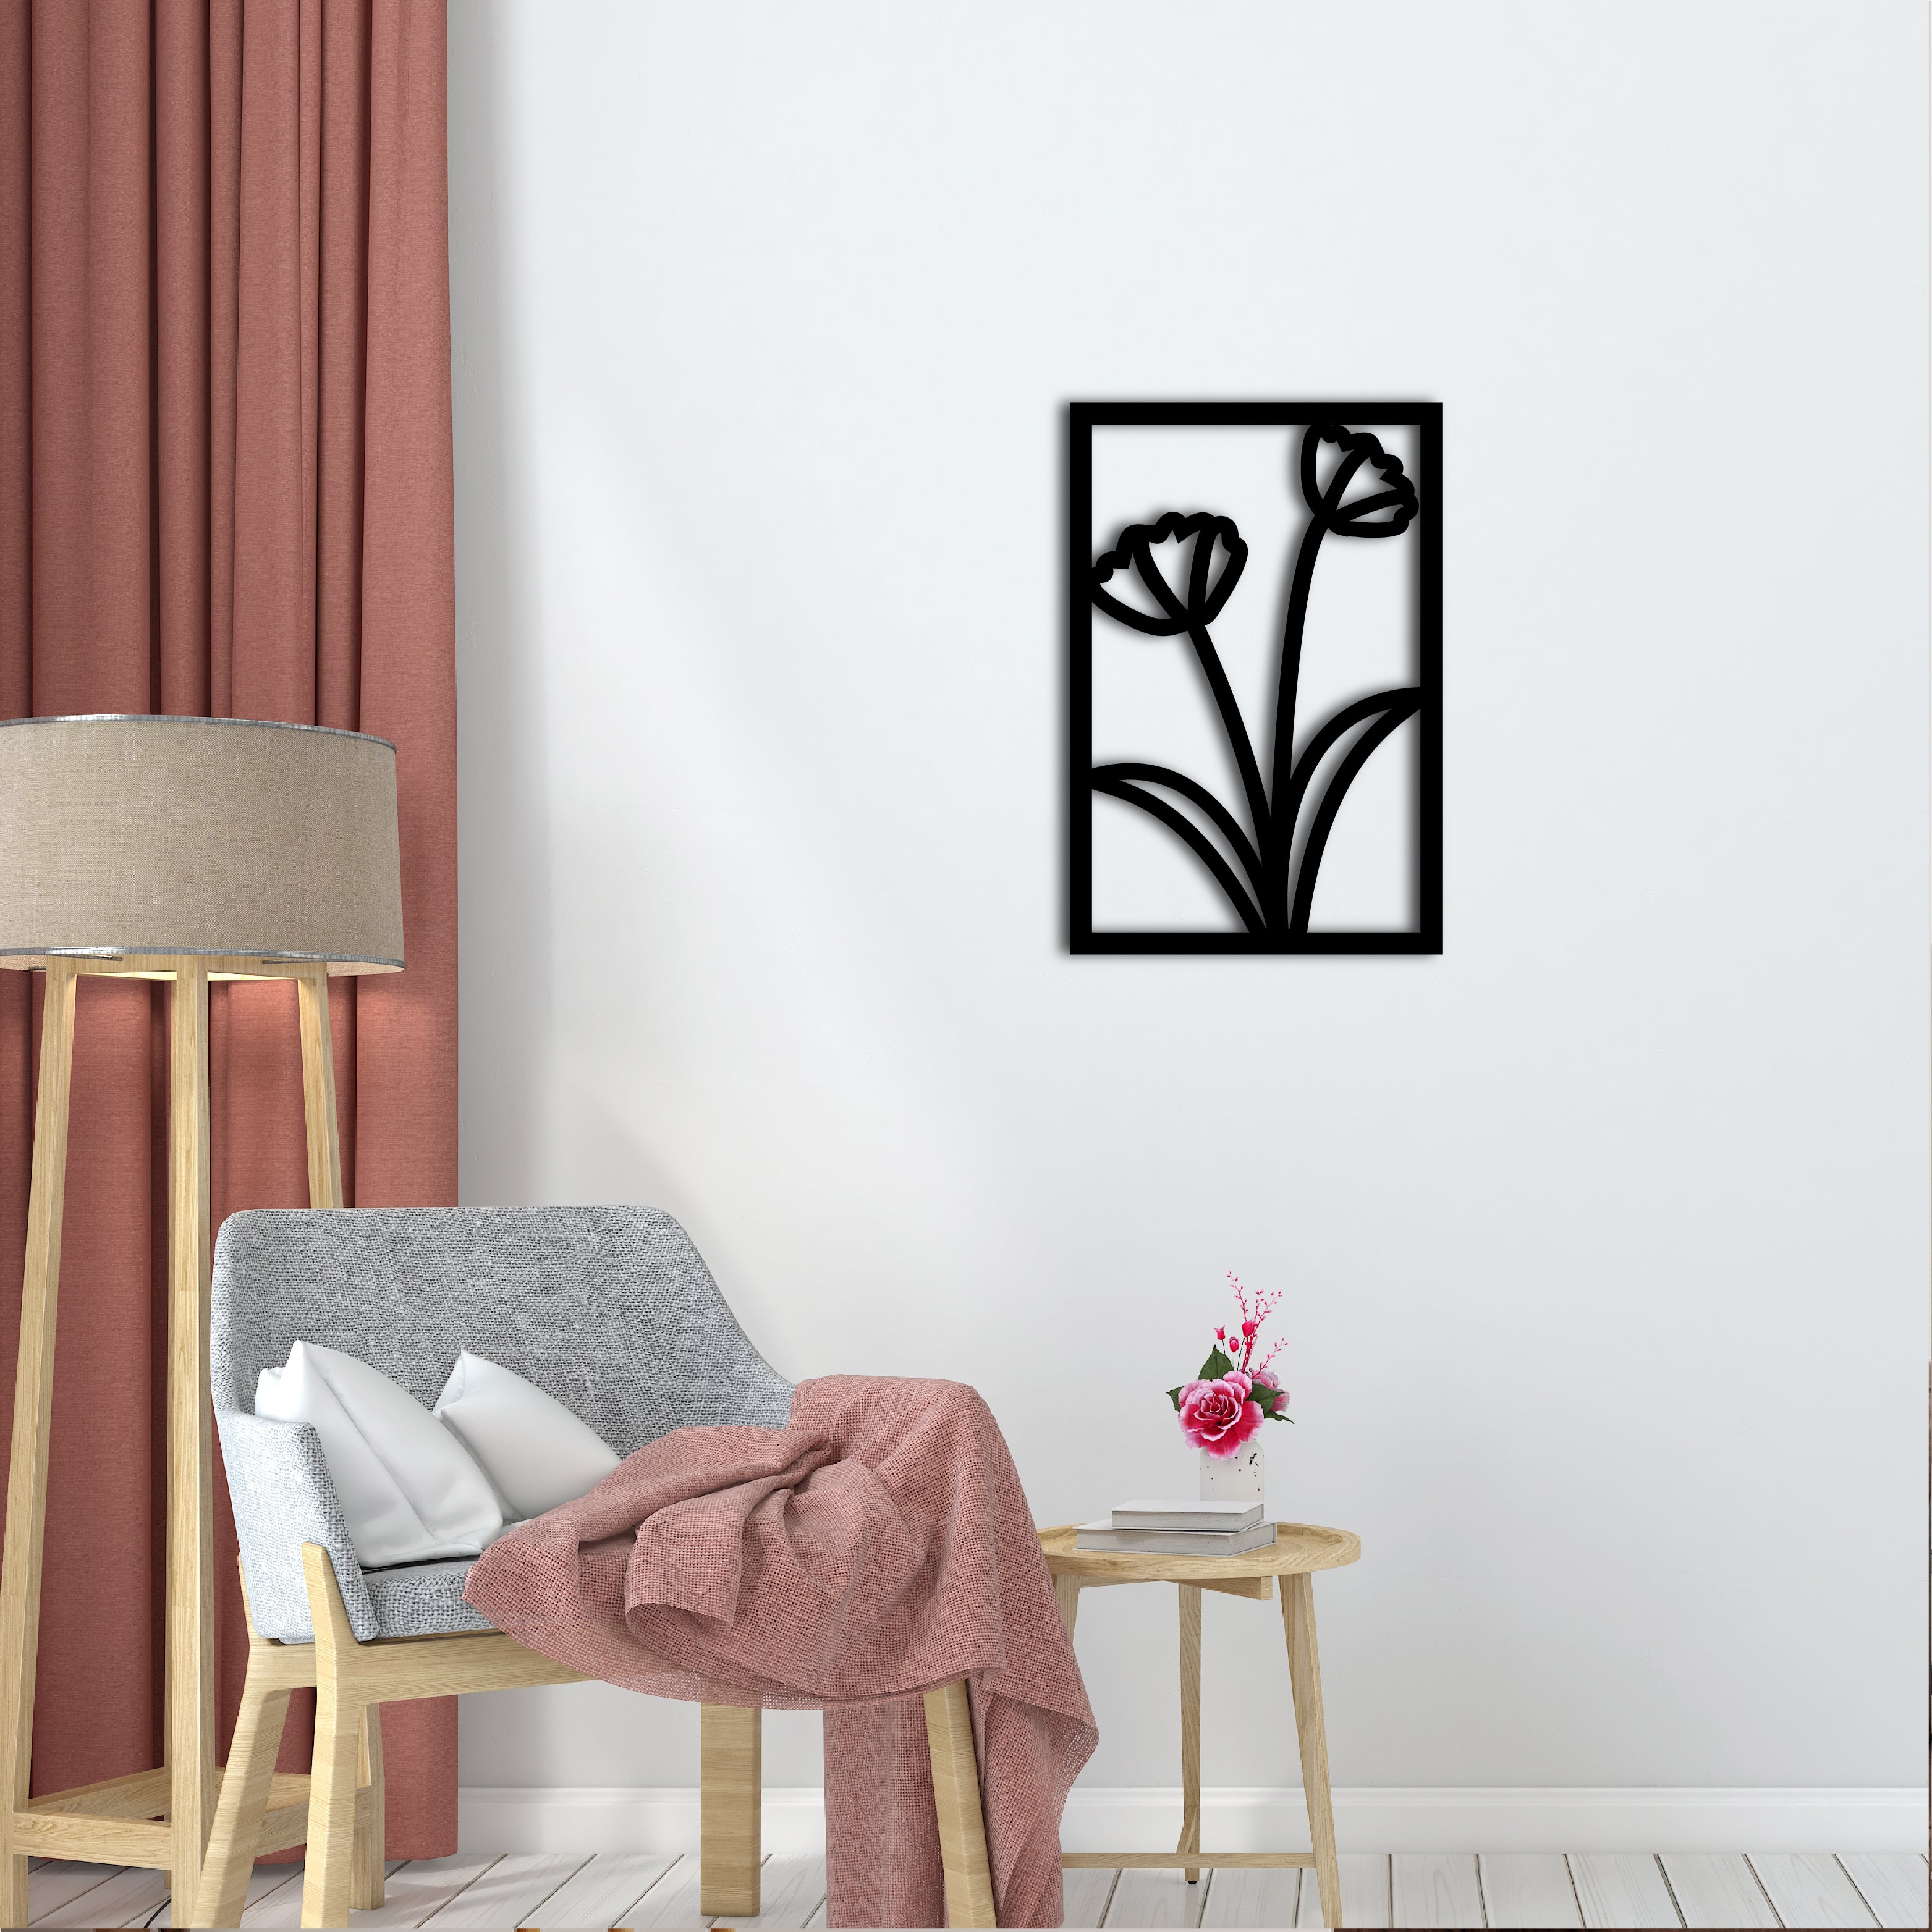 "Flower frame" Black Engineered Wood Wall Art Cutout, Ready to Hang Home Decor 1